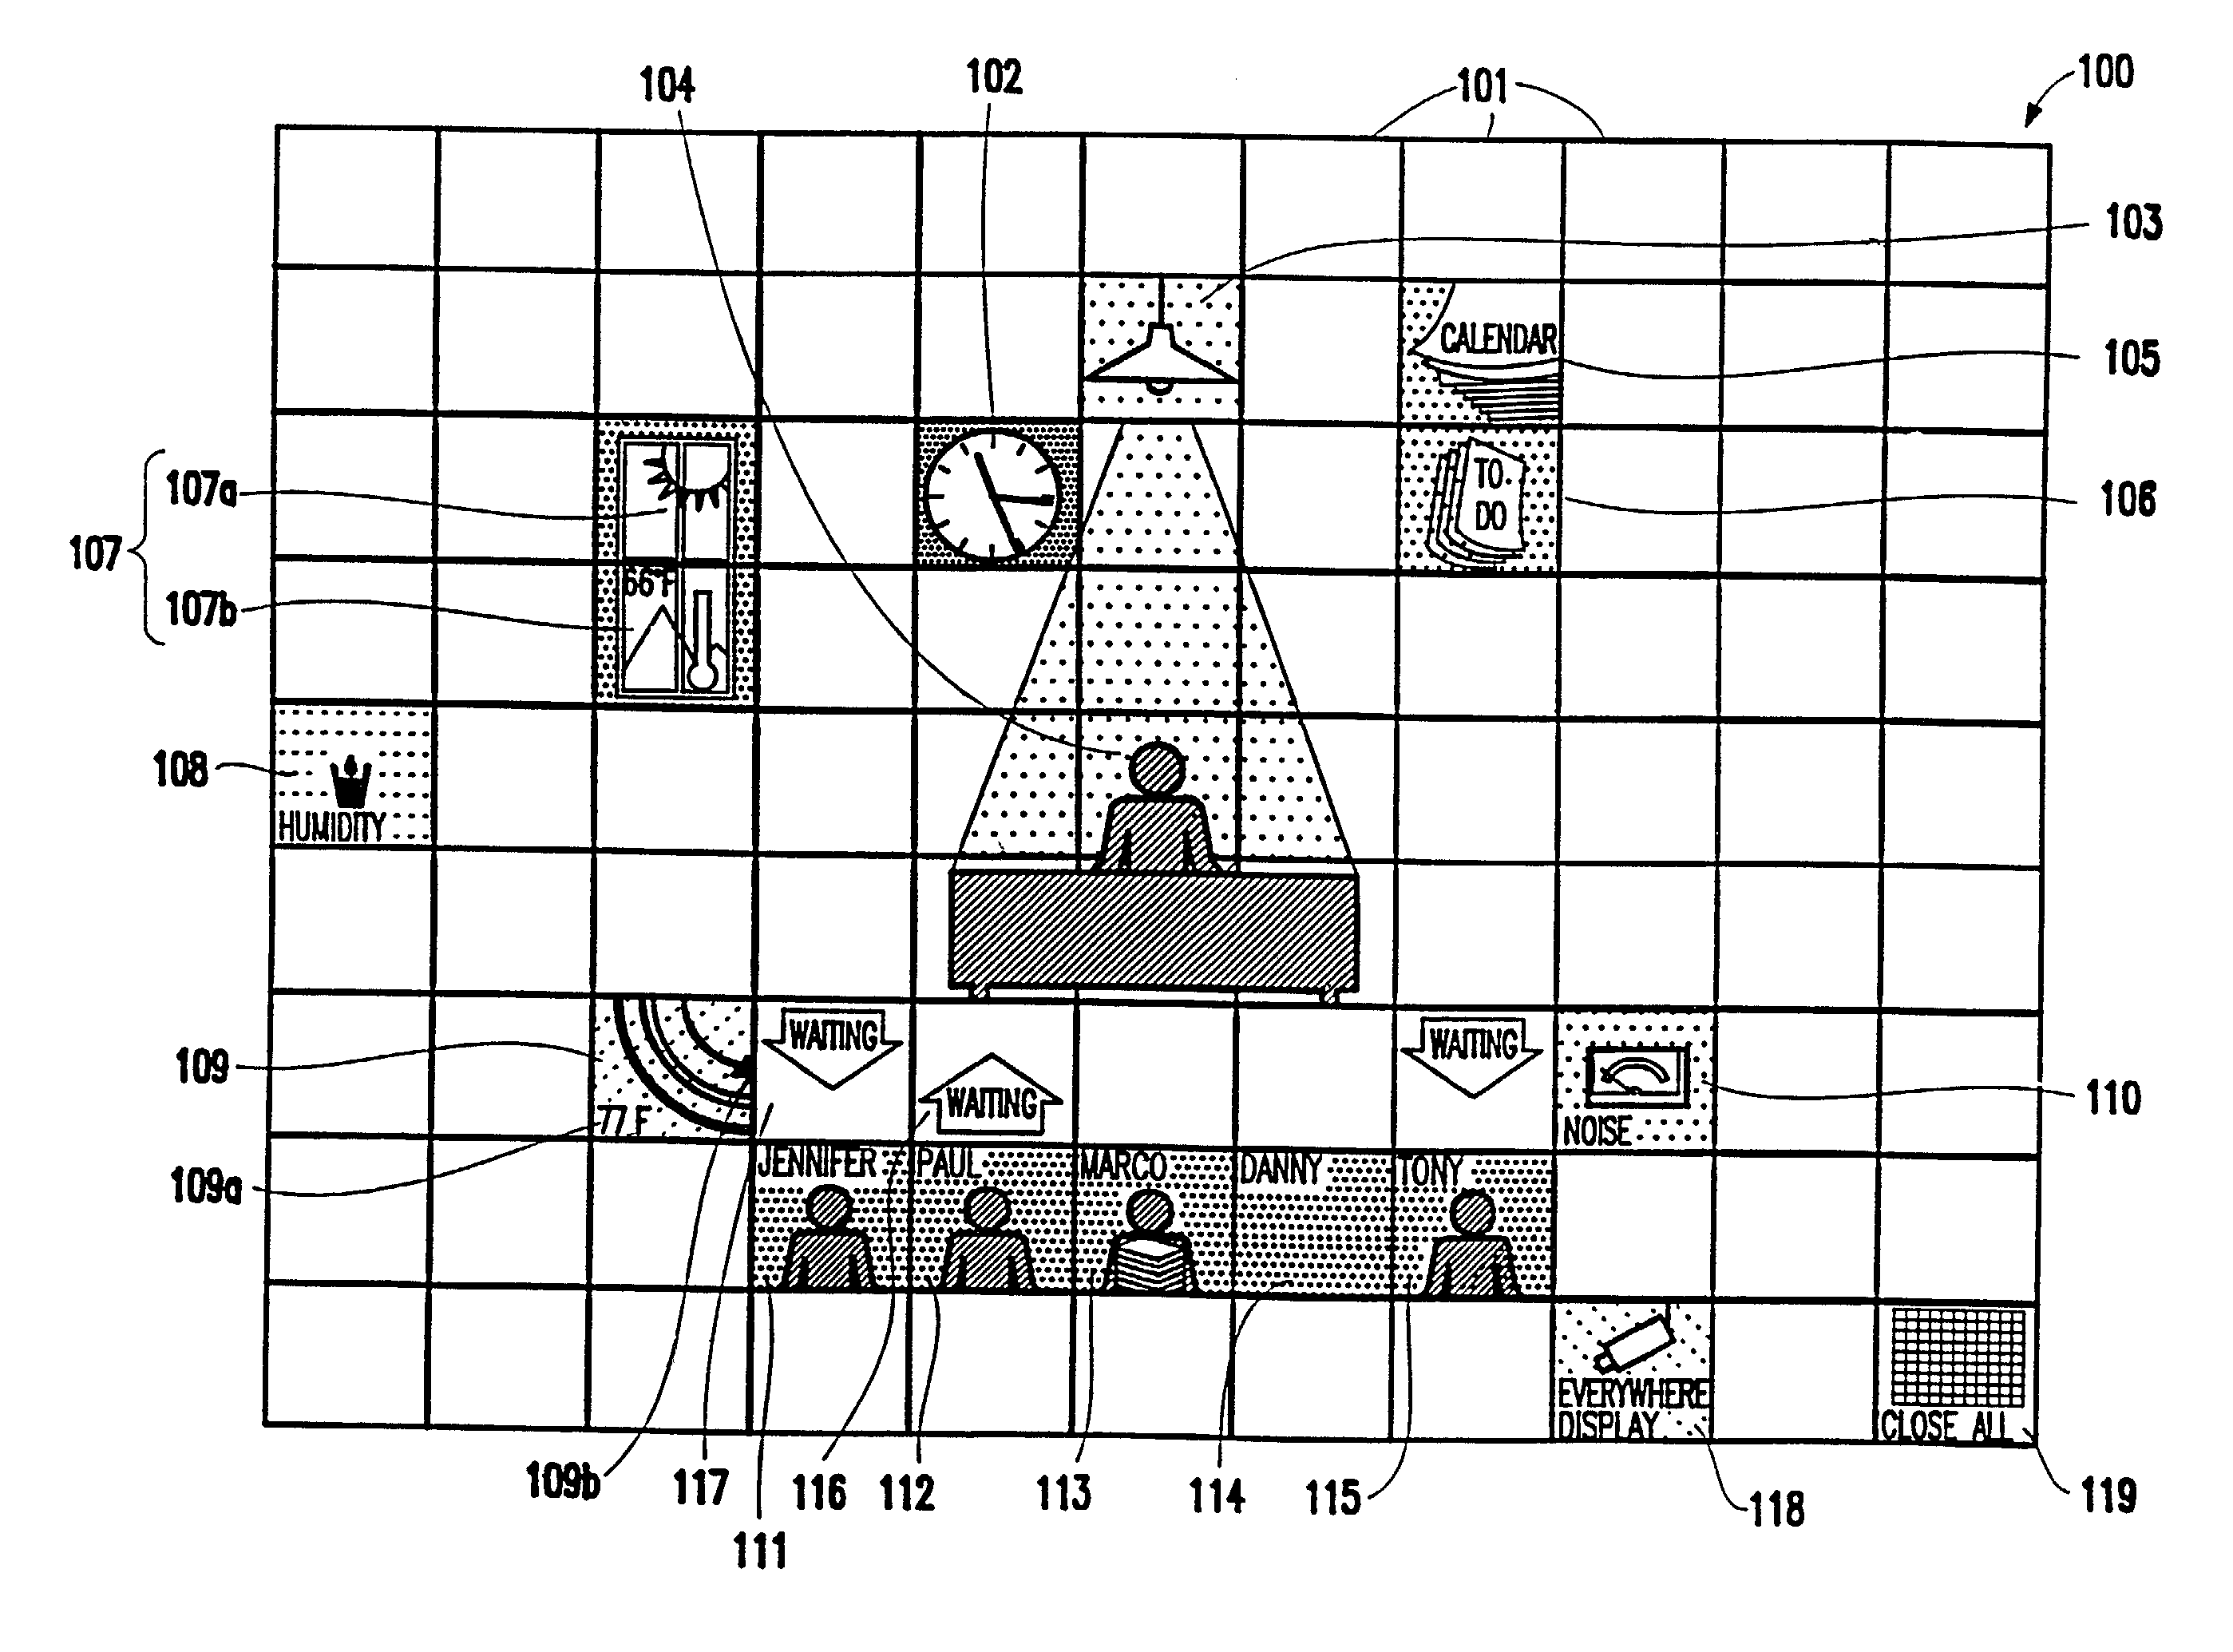 Method and system for software applications using a tiled user interface